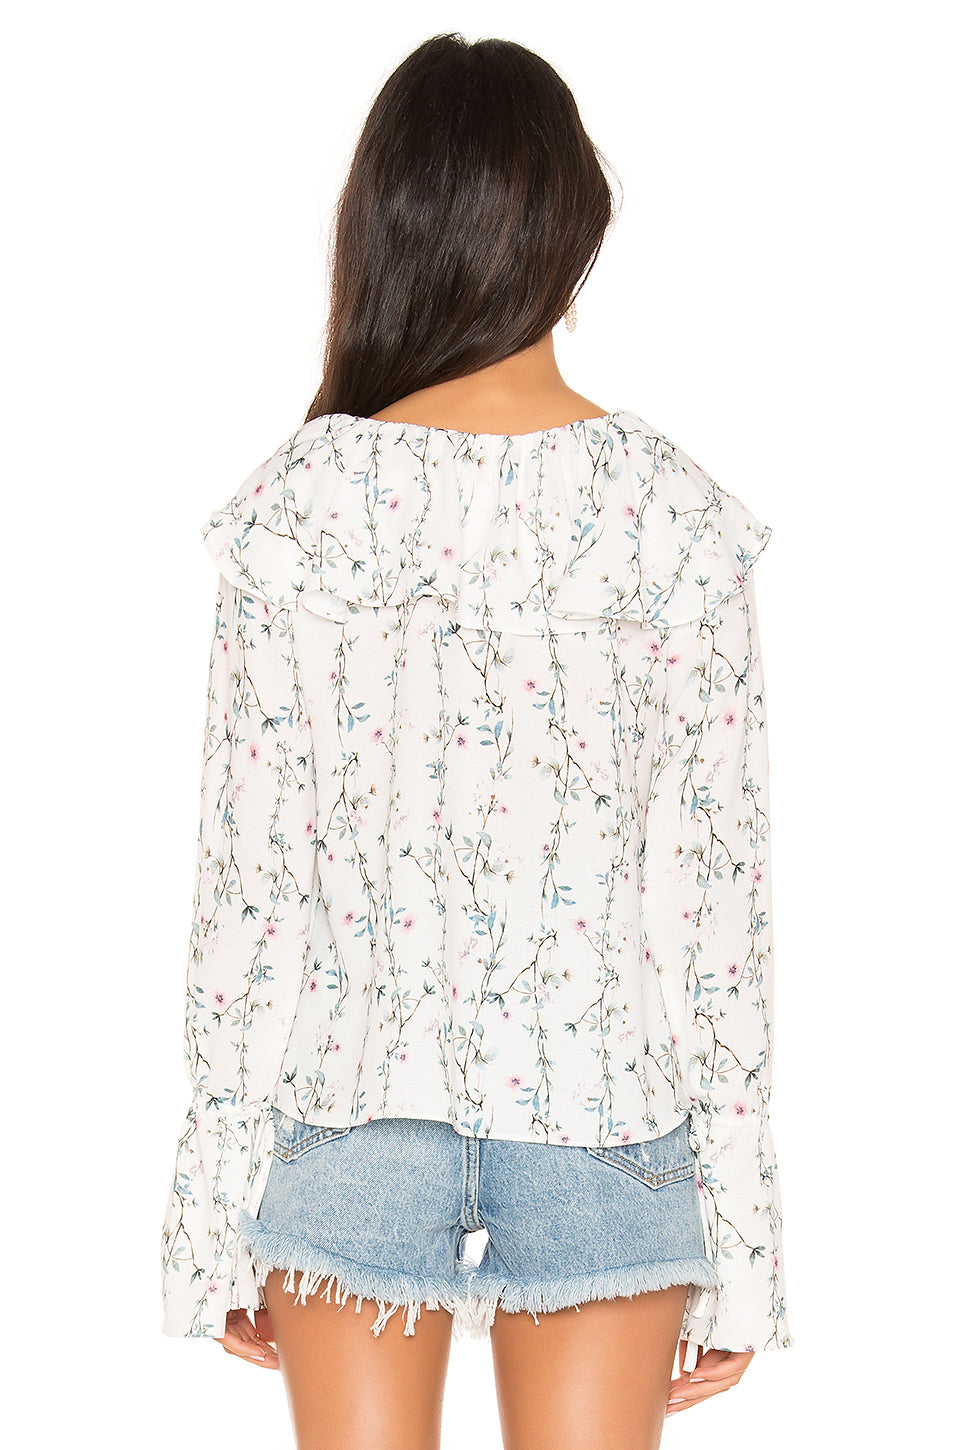 Catherine Blouse in IVORY VINE FLORAL